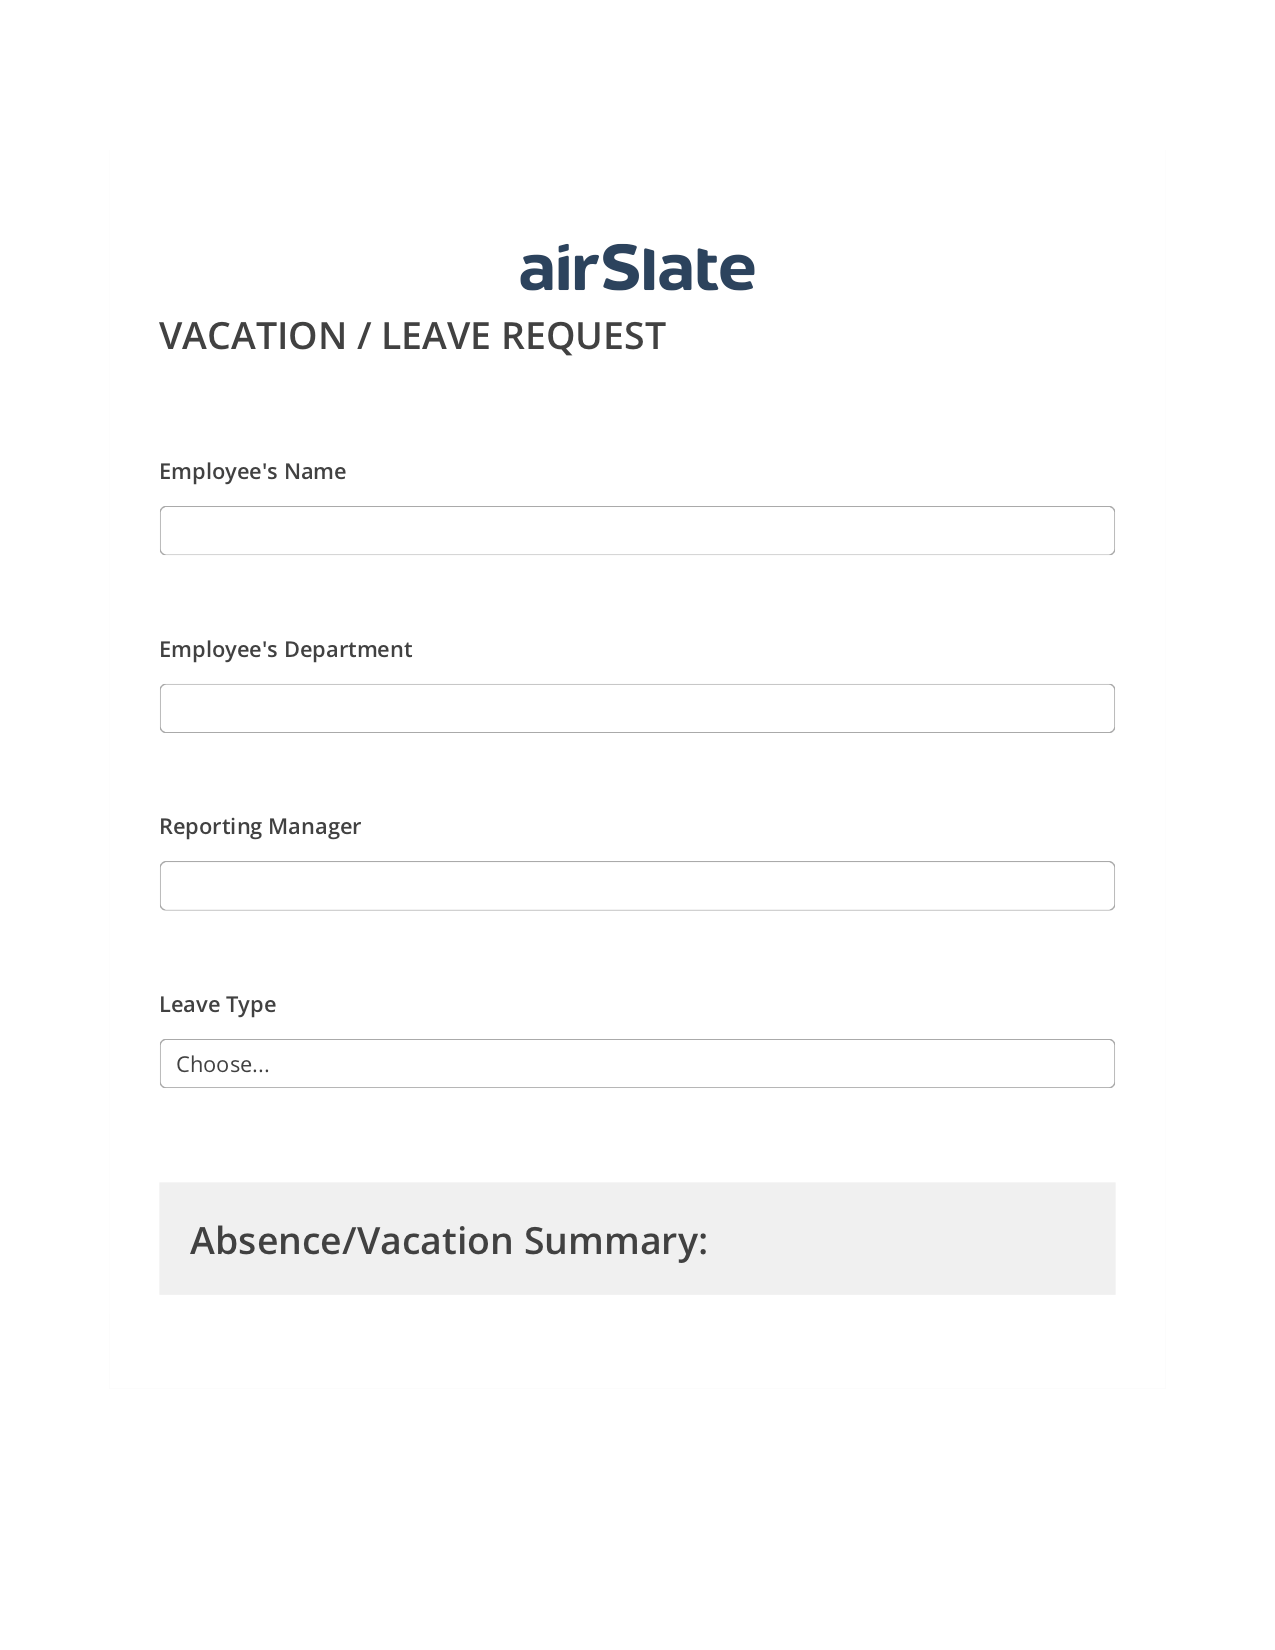 Vacation/Leave Request Workflow Pre-fill from Google Sheets Bot, Lock the Slate Bot, Archive to Box Bot